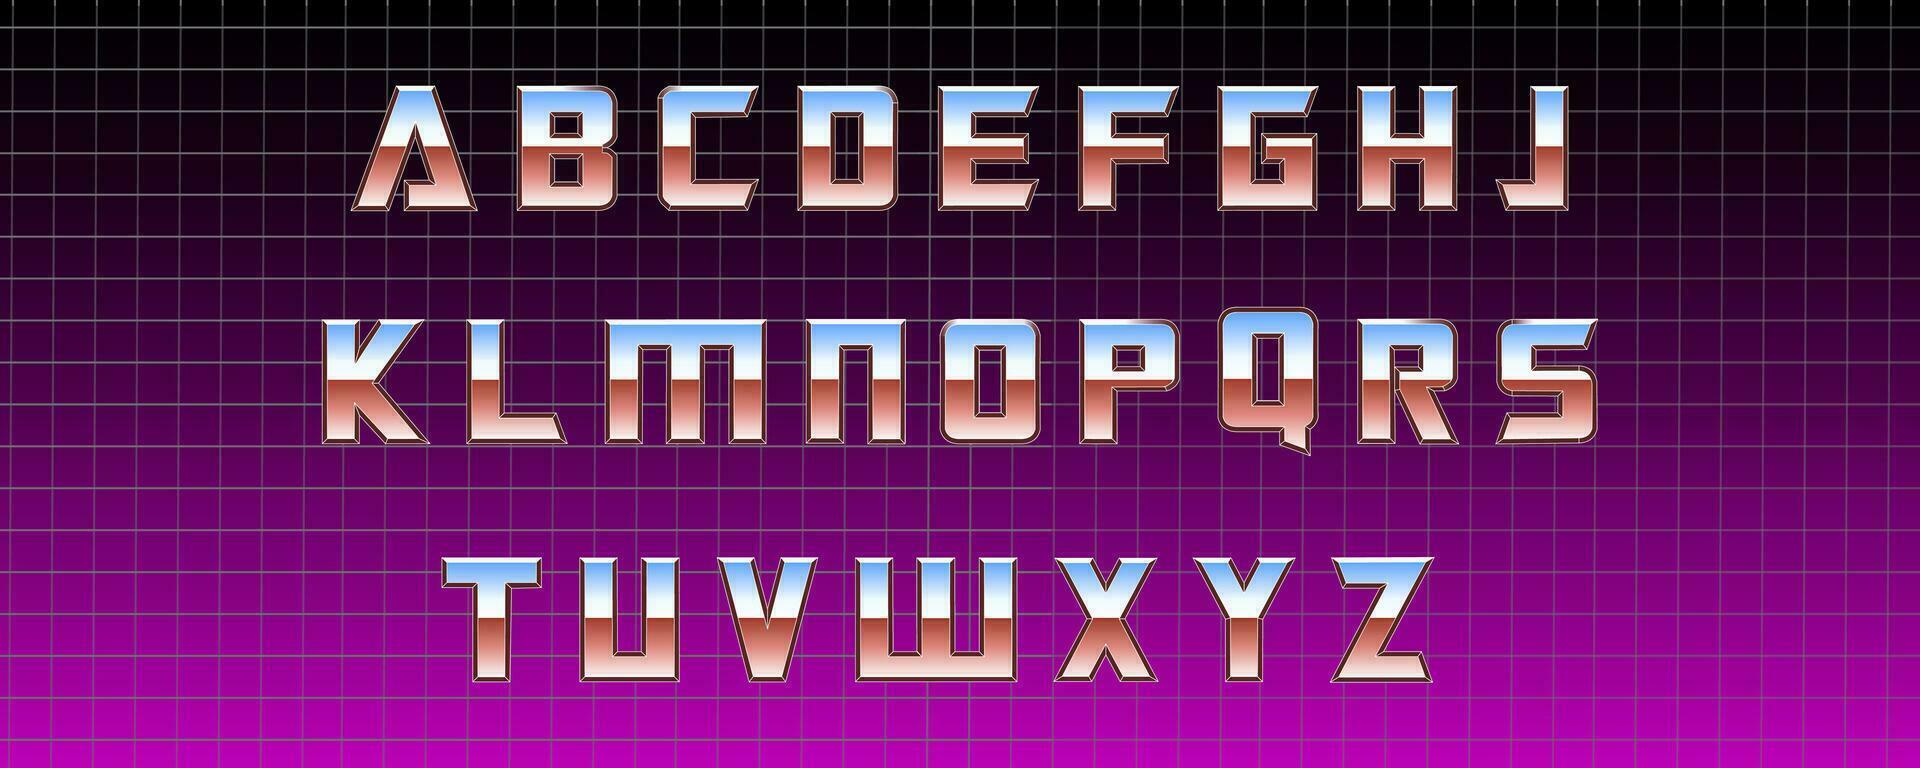 Retro alphabet on grid background. Metallic letters in 80's and 90's style for print and web projects. Graphic elements in retro aesthetic for posters, flyers and banners. Vintage letters collection. vector